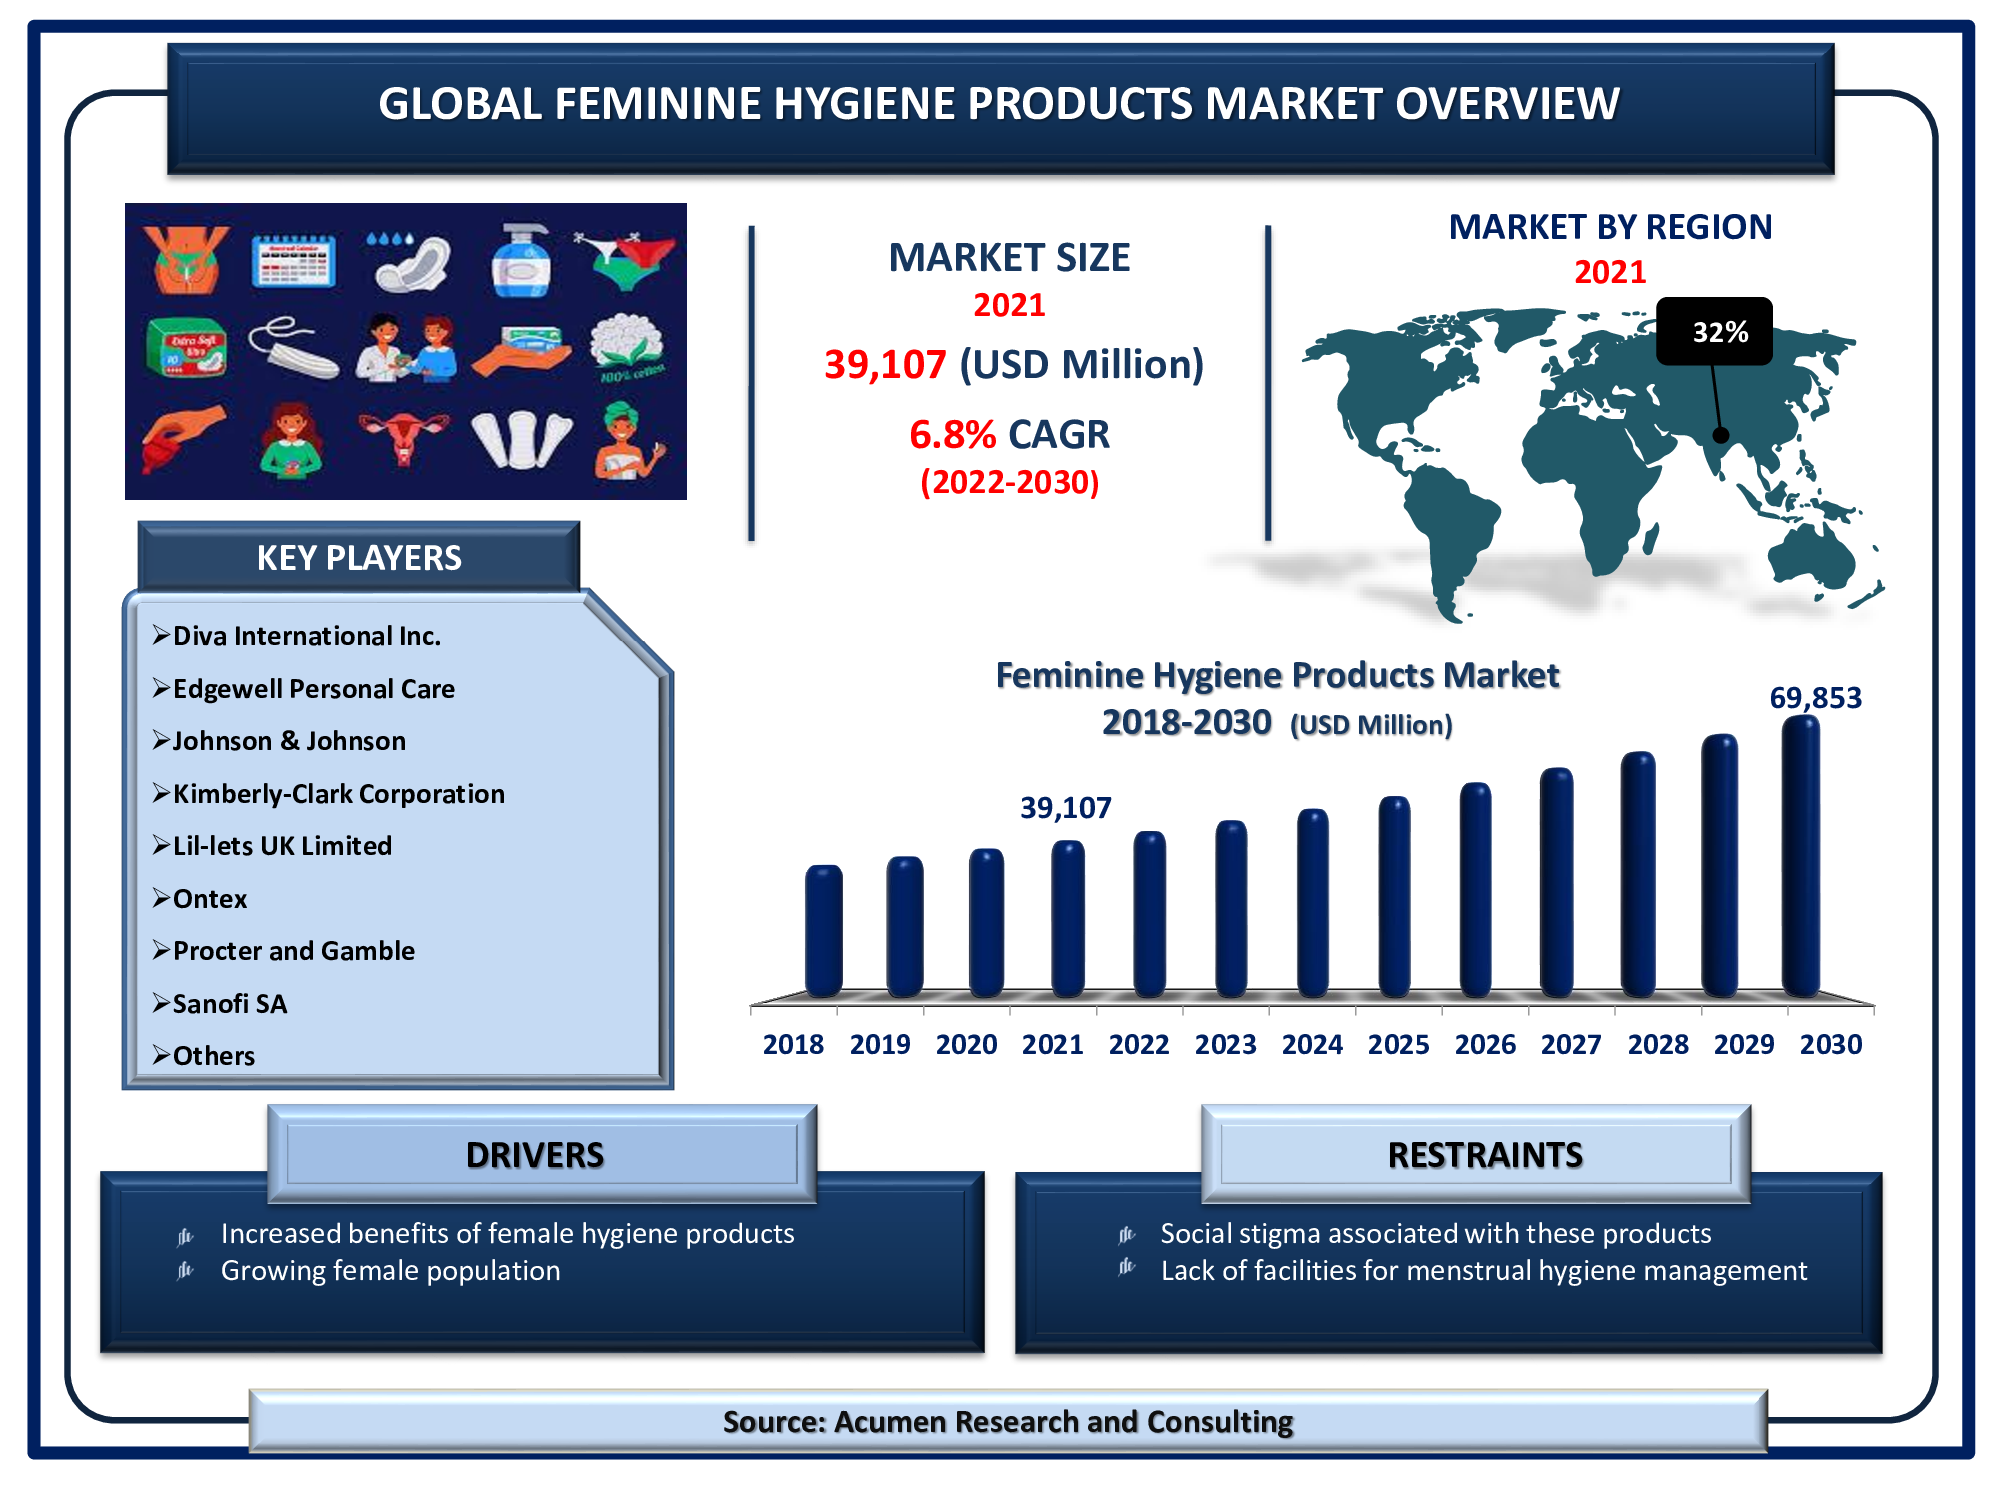 Feminine Hygiene Products Market Size is valued at USD 39,107 Million in 2021 and is projected to reach a market size of USD 69,853 Million by 2030; growing at a CAGR of 6.8%.